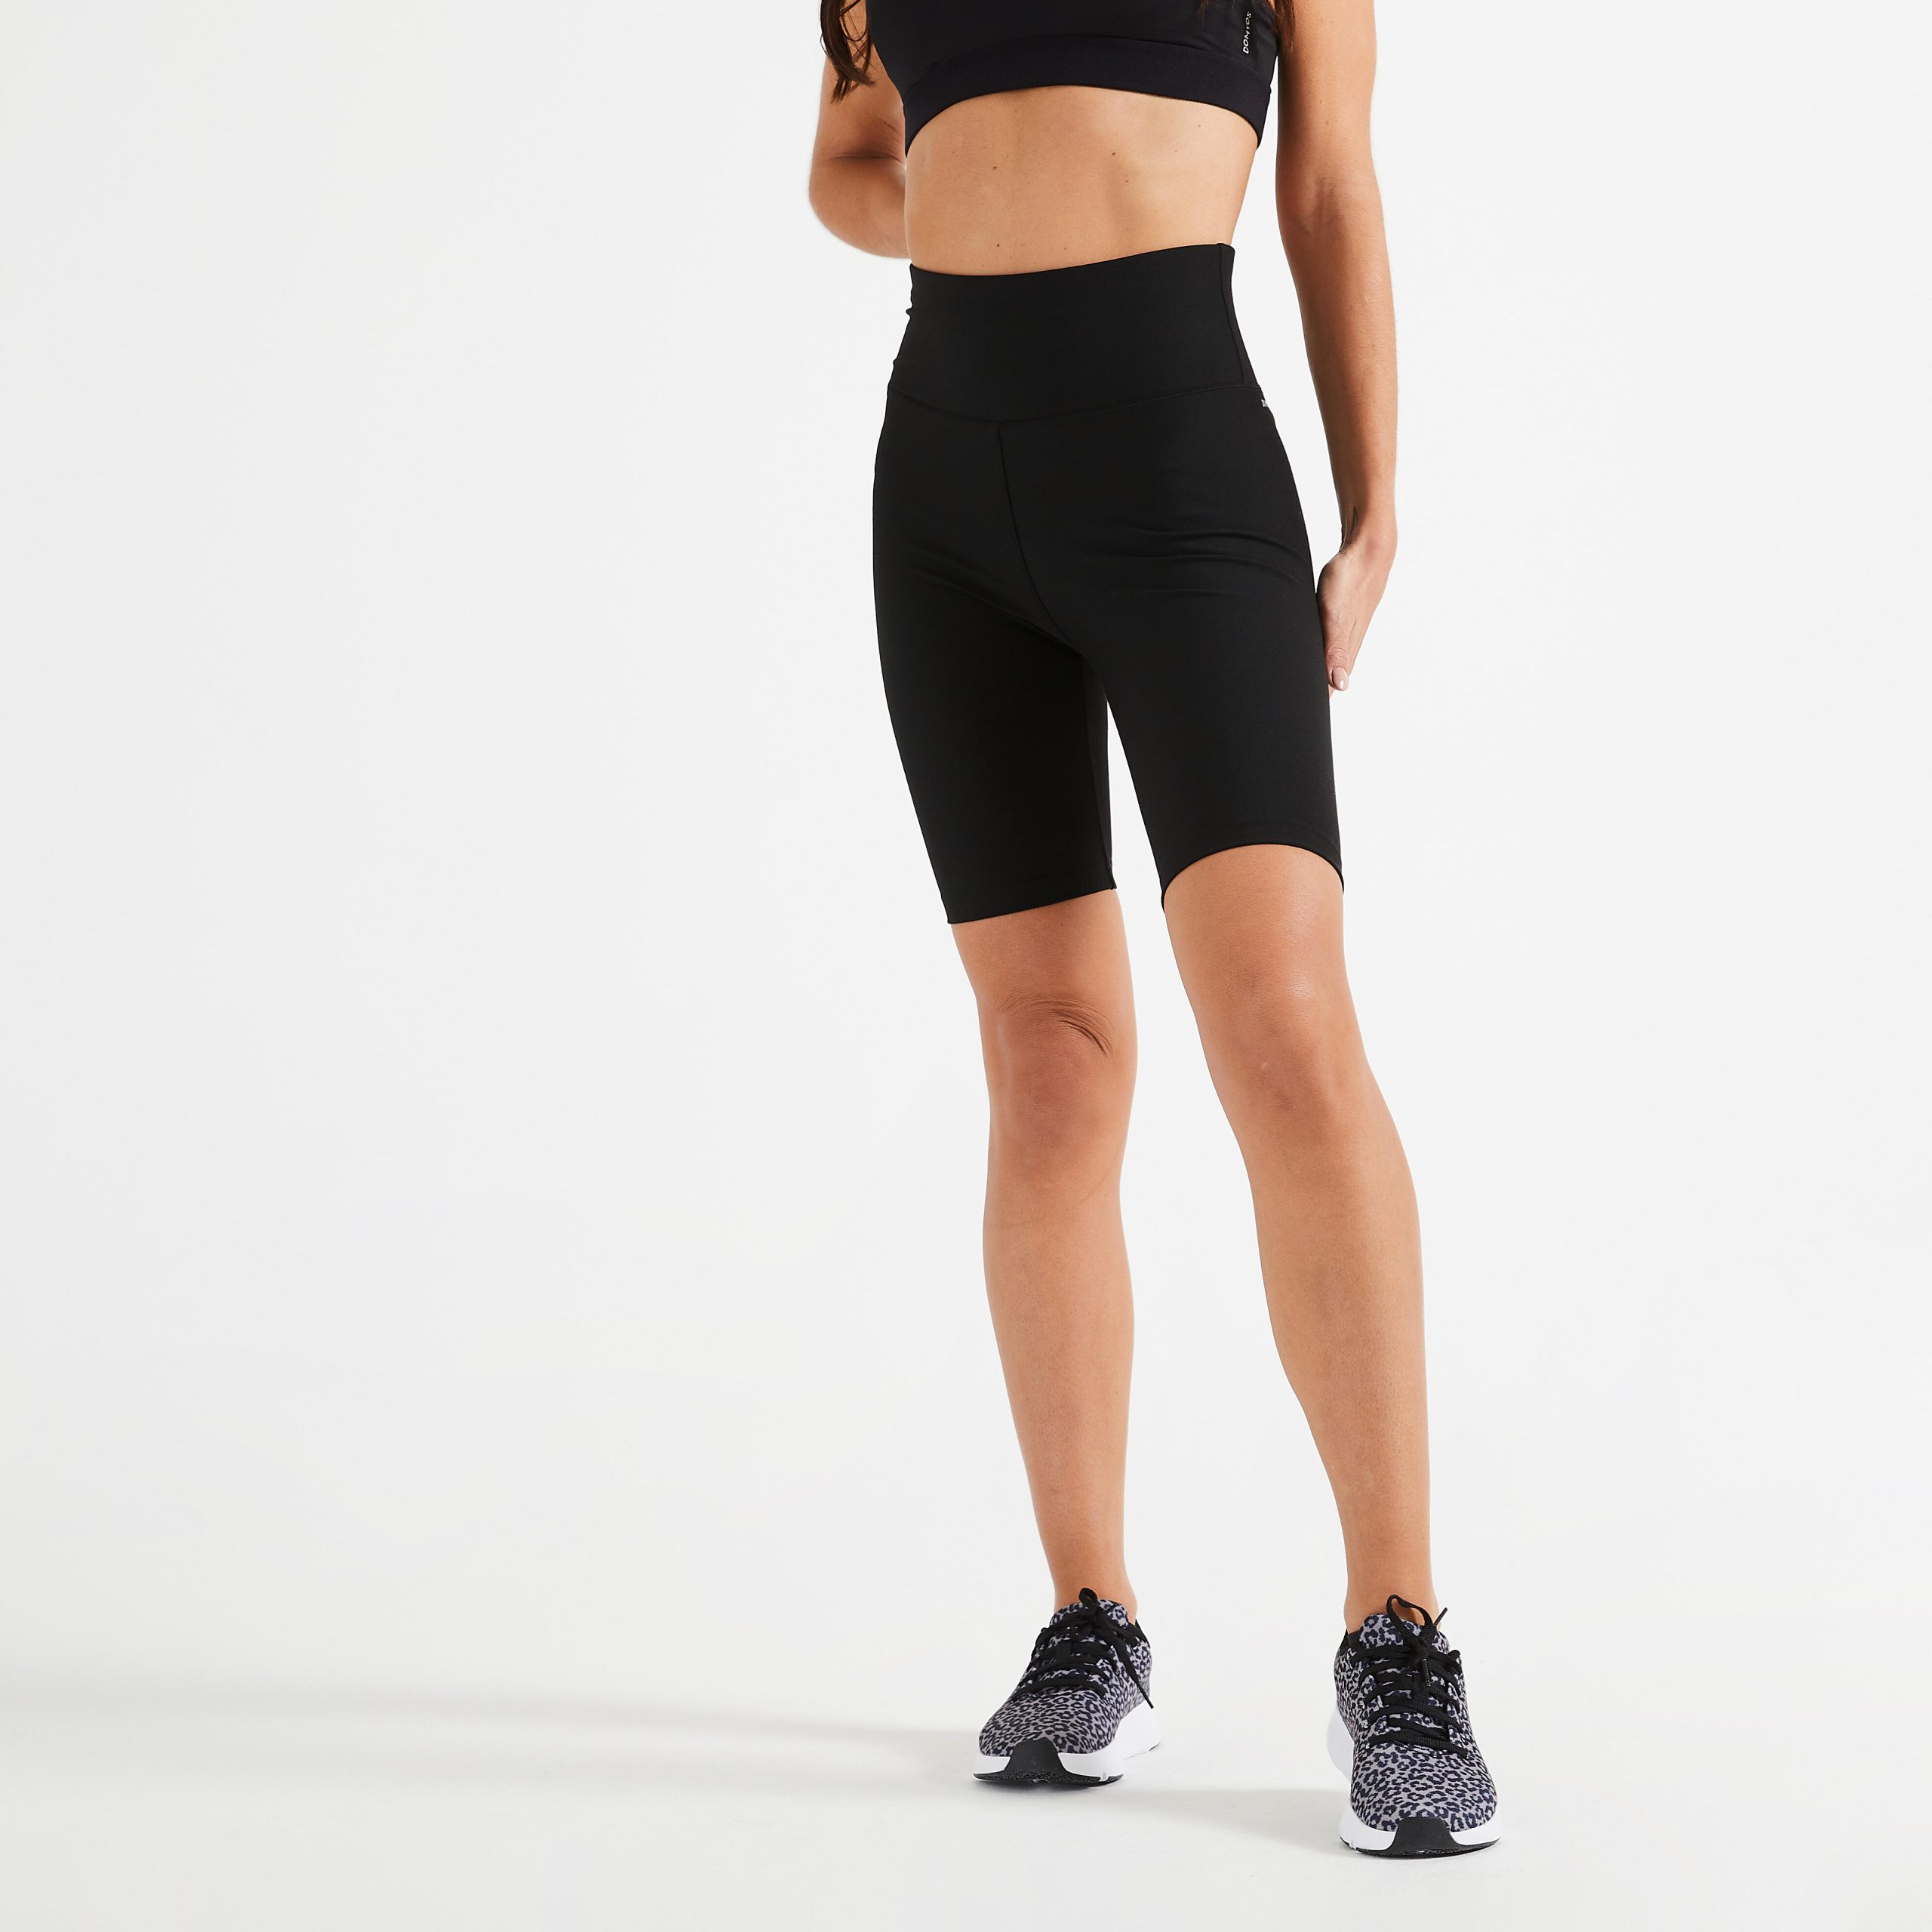 Score big on Latest Fashion Women's High-Waisted Fitness Cardio Cycling  Shorts - Black items with up to 50% off